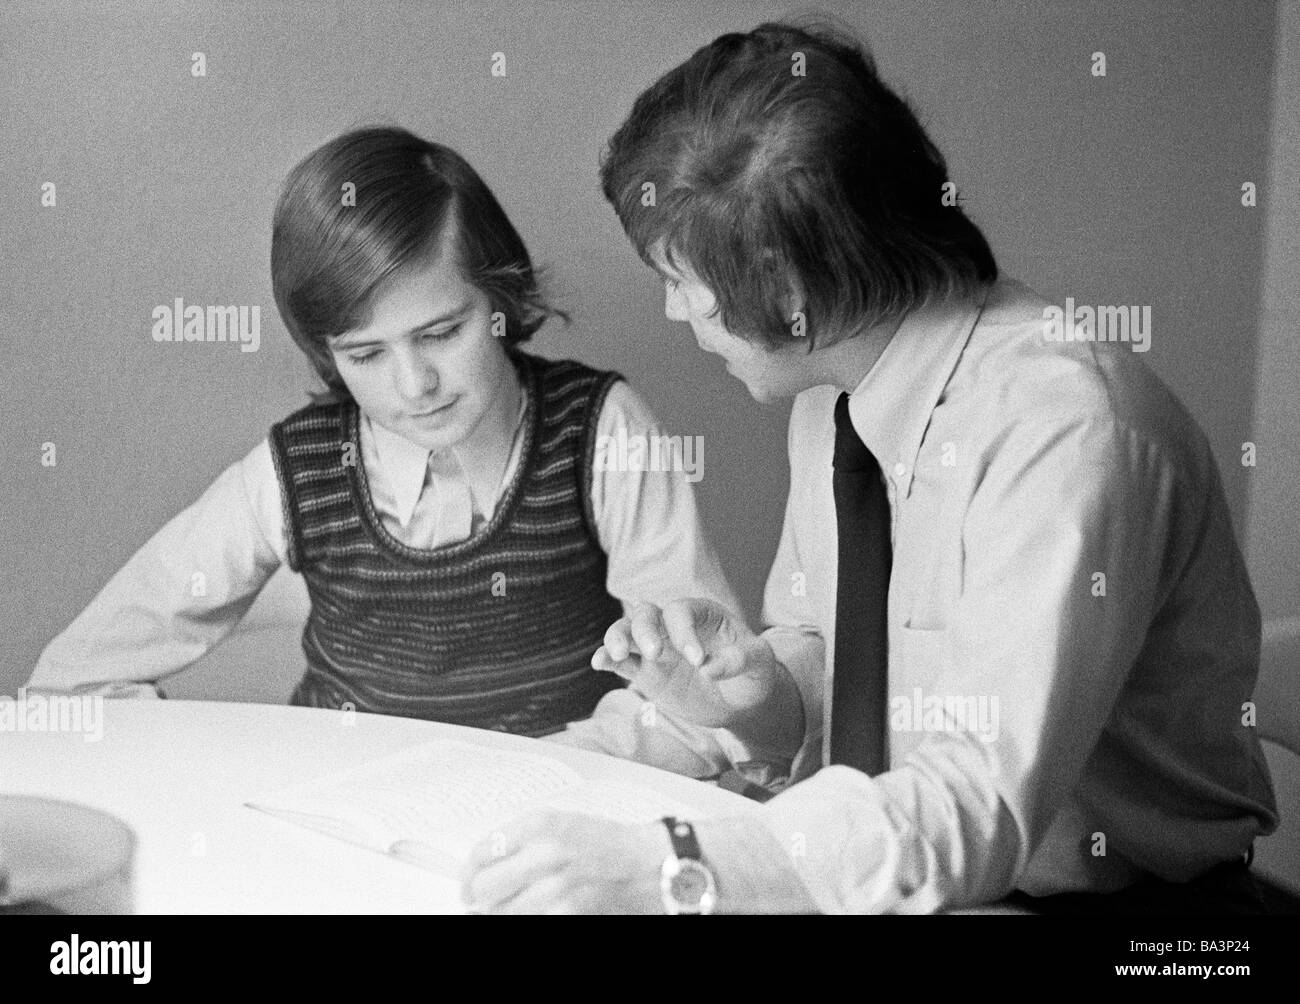 Seventies, black and white photo, people, young boy during homework, his father sits side by side and declares the tasks, aged 14 to 17 years, aged 35 to 40 years Stock Photo